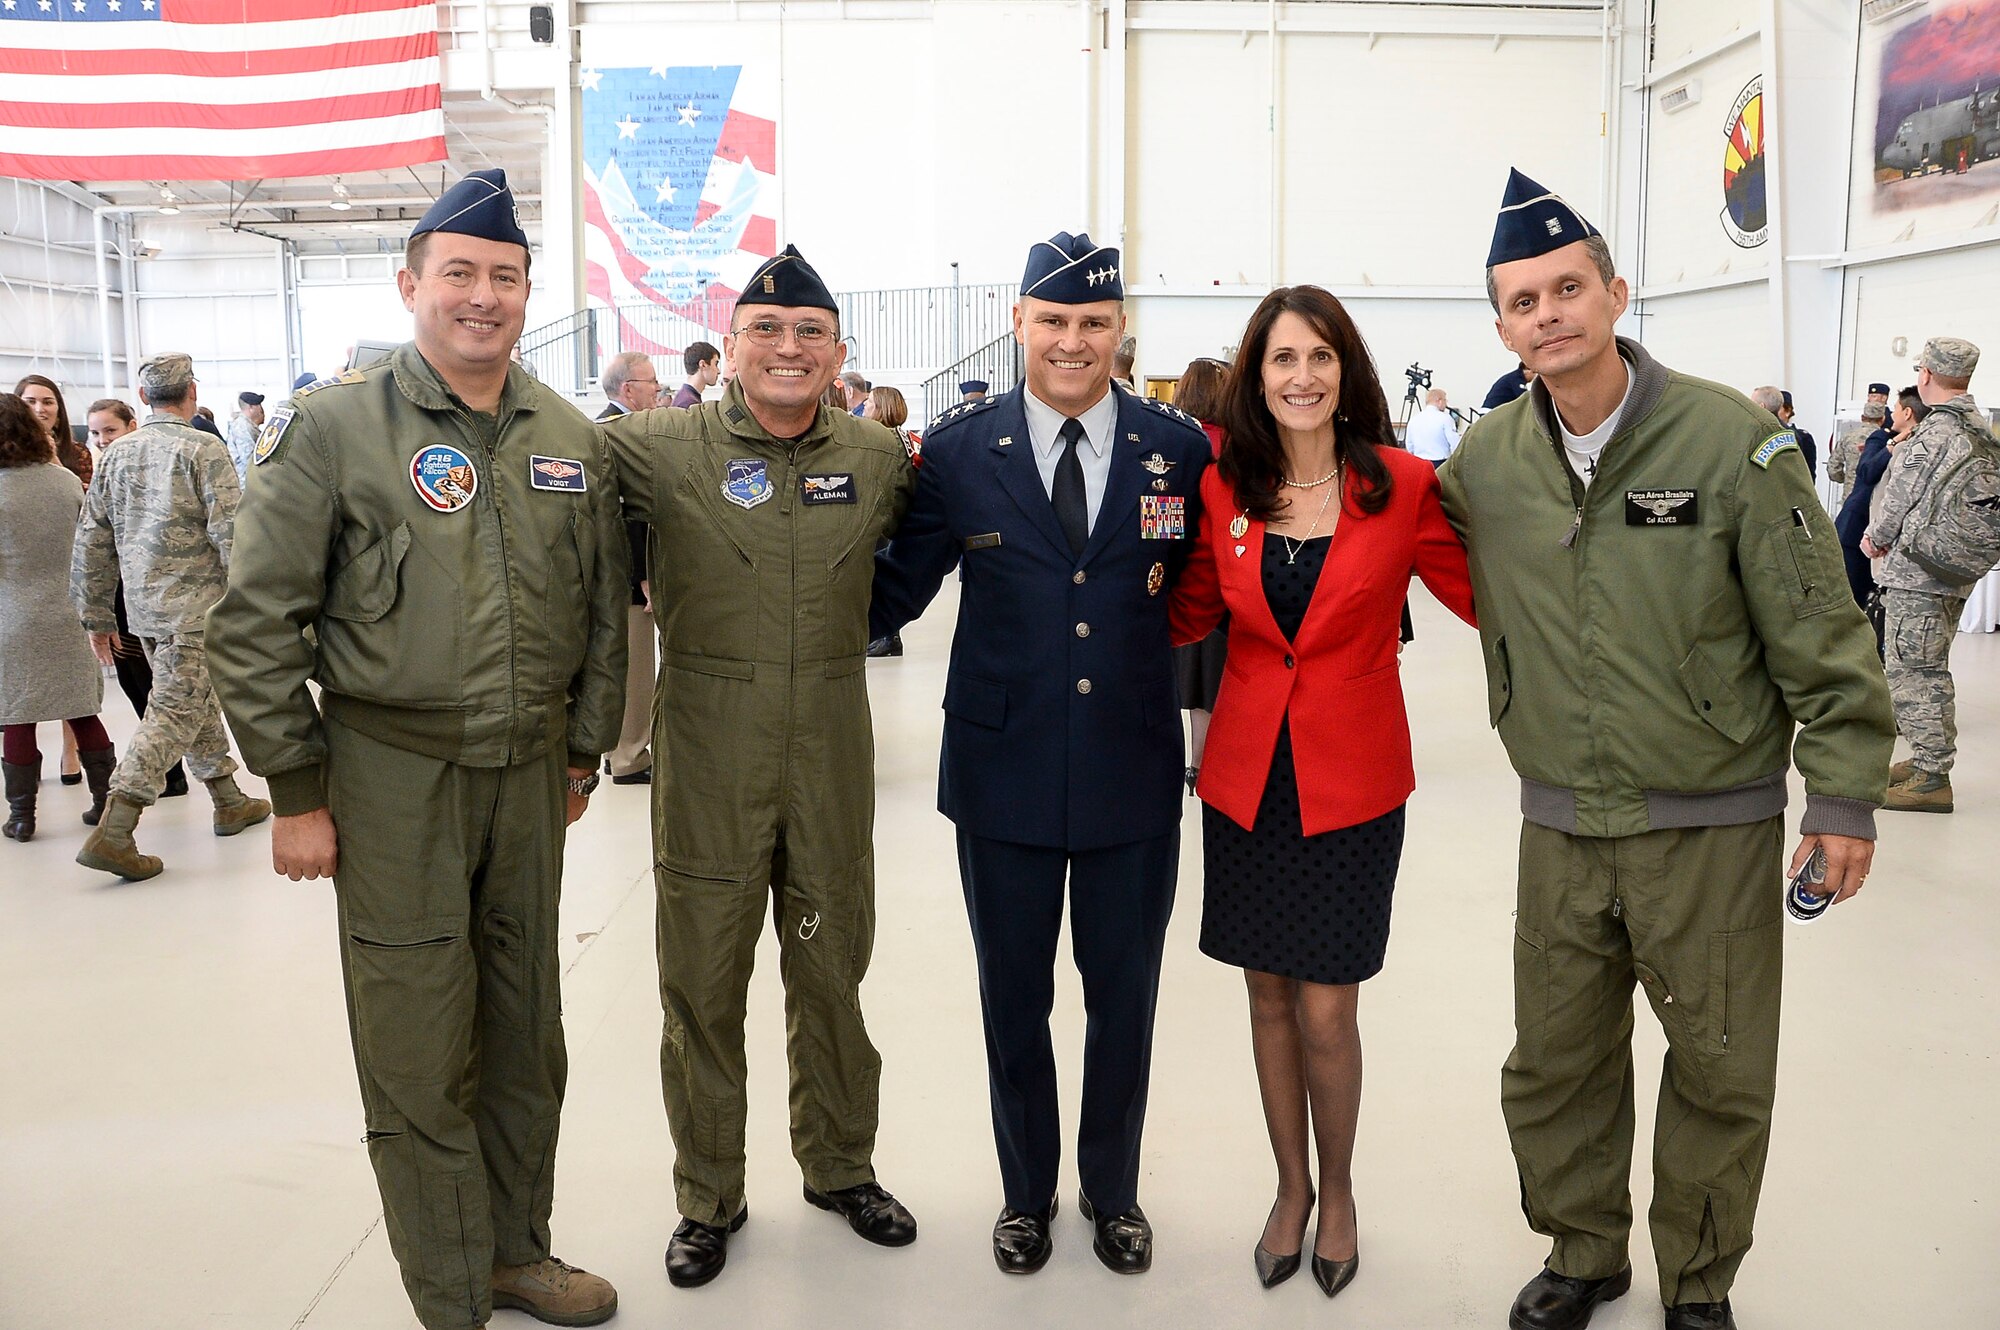 Lt. Gen. Chris Nowland, 12th Air Force (Air Forces Southern) commander, and his wife Kristan pose for a photo with the Air Forces Southern Liason Officers at Davis-Monthan AFB, Ariz., Dec. 19, 2014. 12th Air Force (Air Forces Southern) is responsible for the combat readiness of eight active-duty wings, including the 355th Fighter Wing also located at Davis-Monthan AFB, and one direct reporting unit. These subordinate commands operate more than 650 aircraft with more than 55,000 uniformed and civilian Airmen. (U.S. Air Force photo by Staff Sgt. Adam Grant/Released)